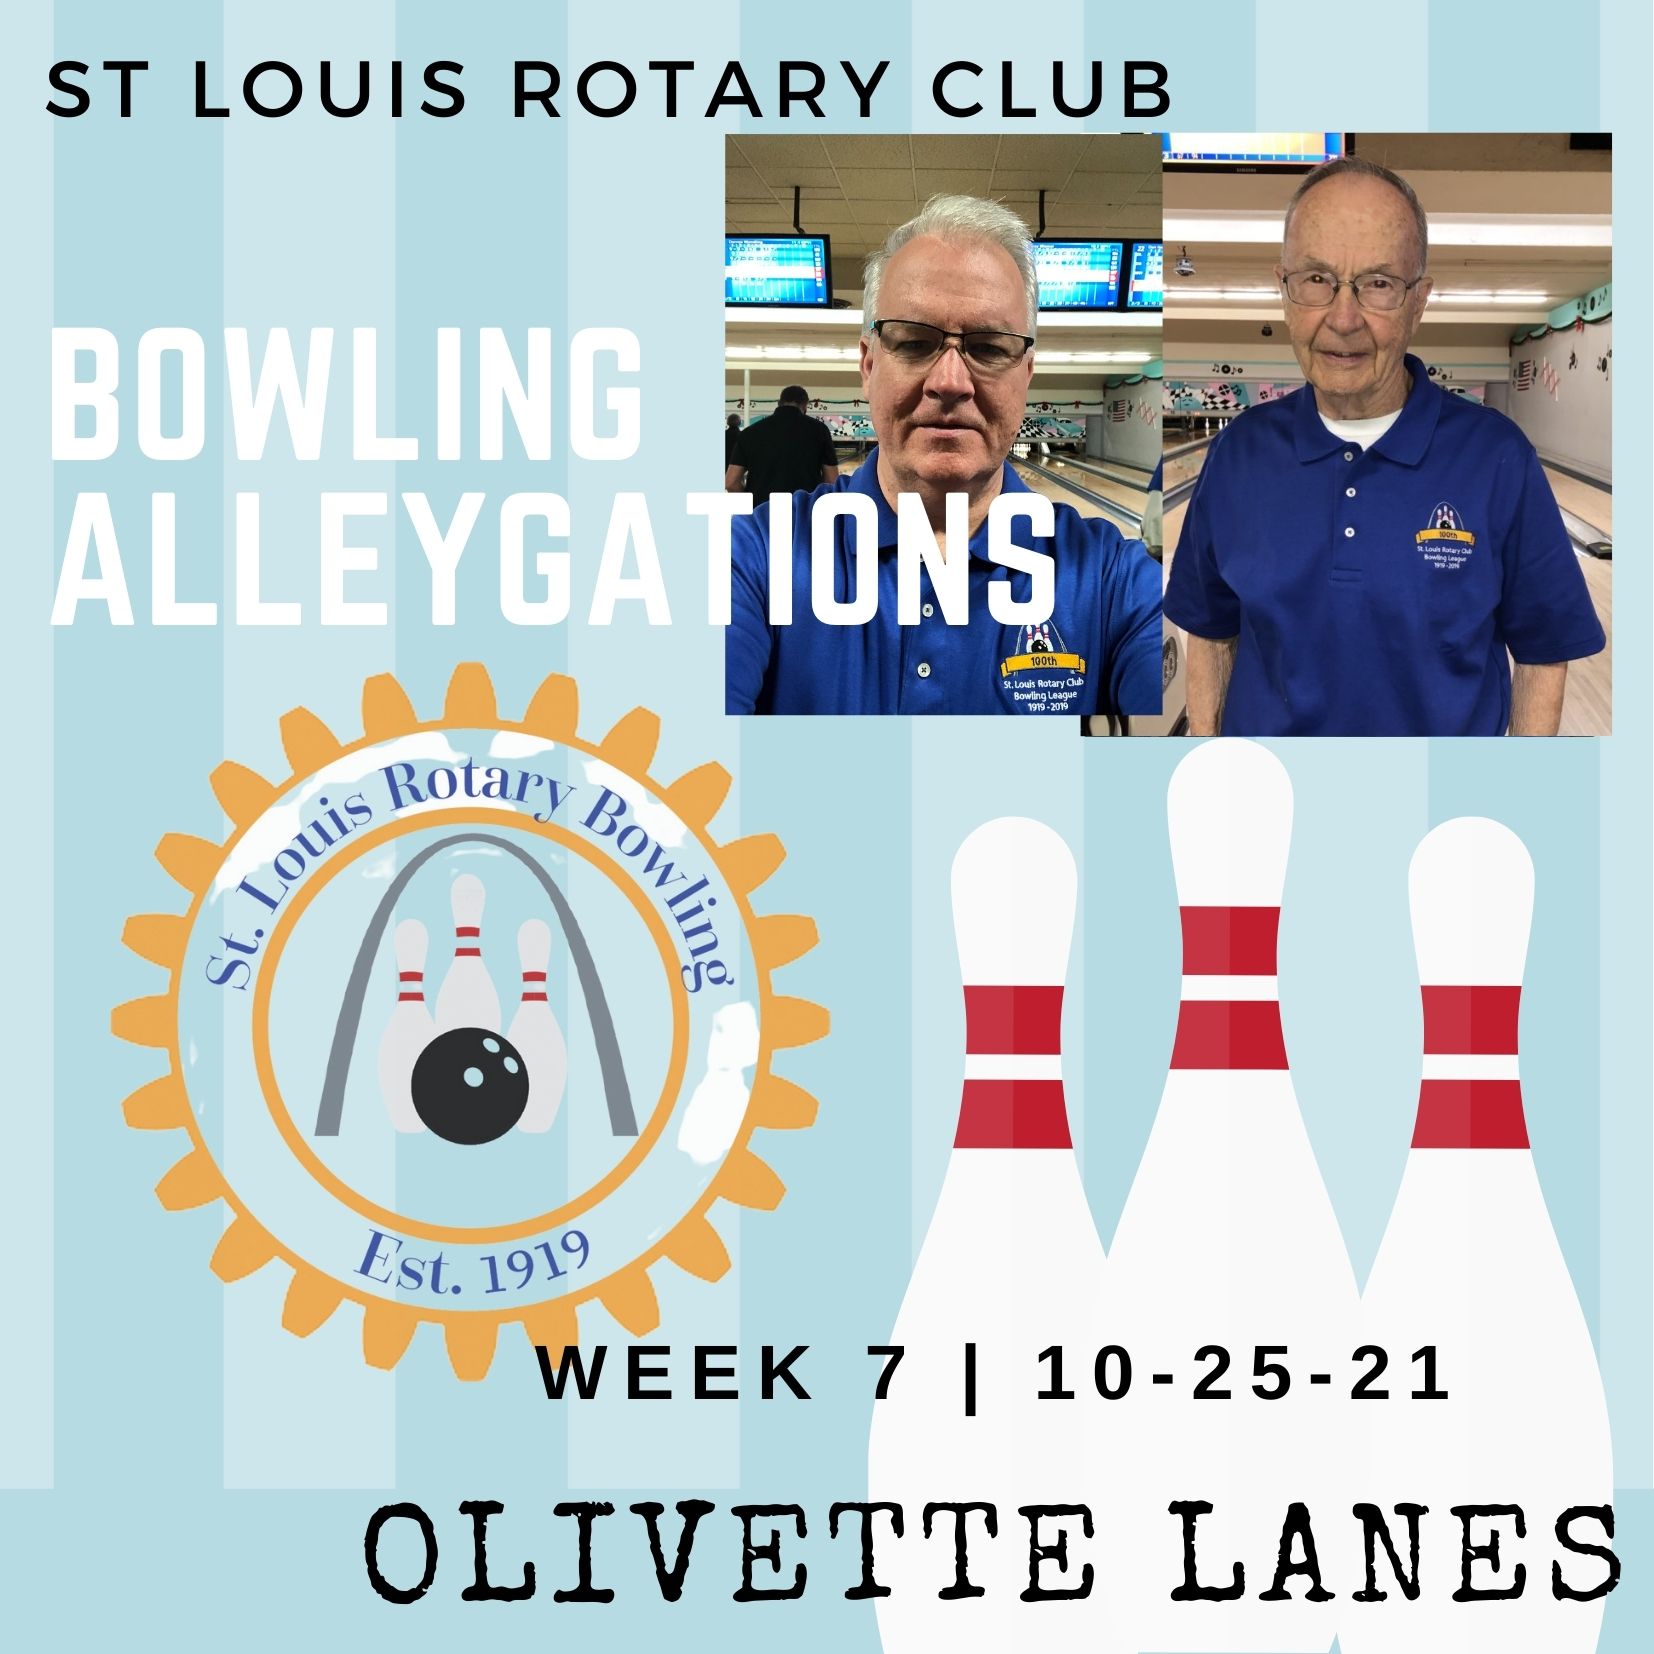 Bowling Alleygations Week 7_ 10-25-21RA